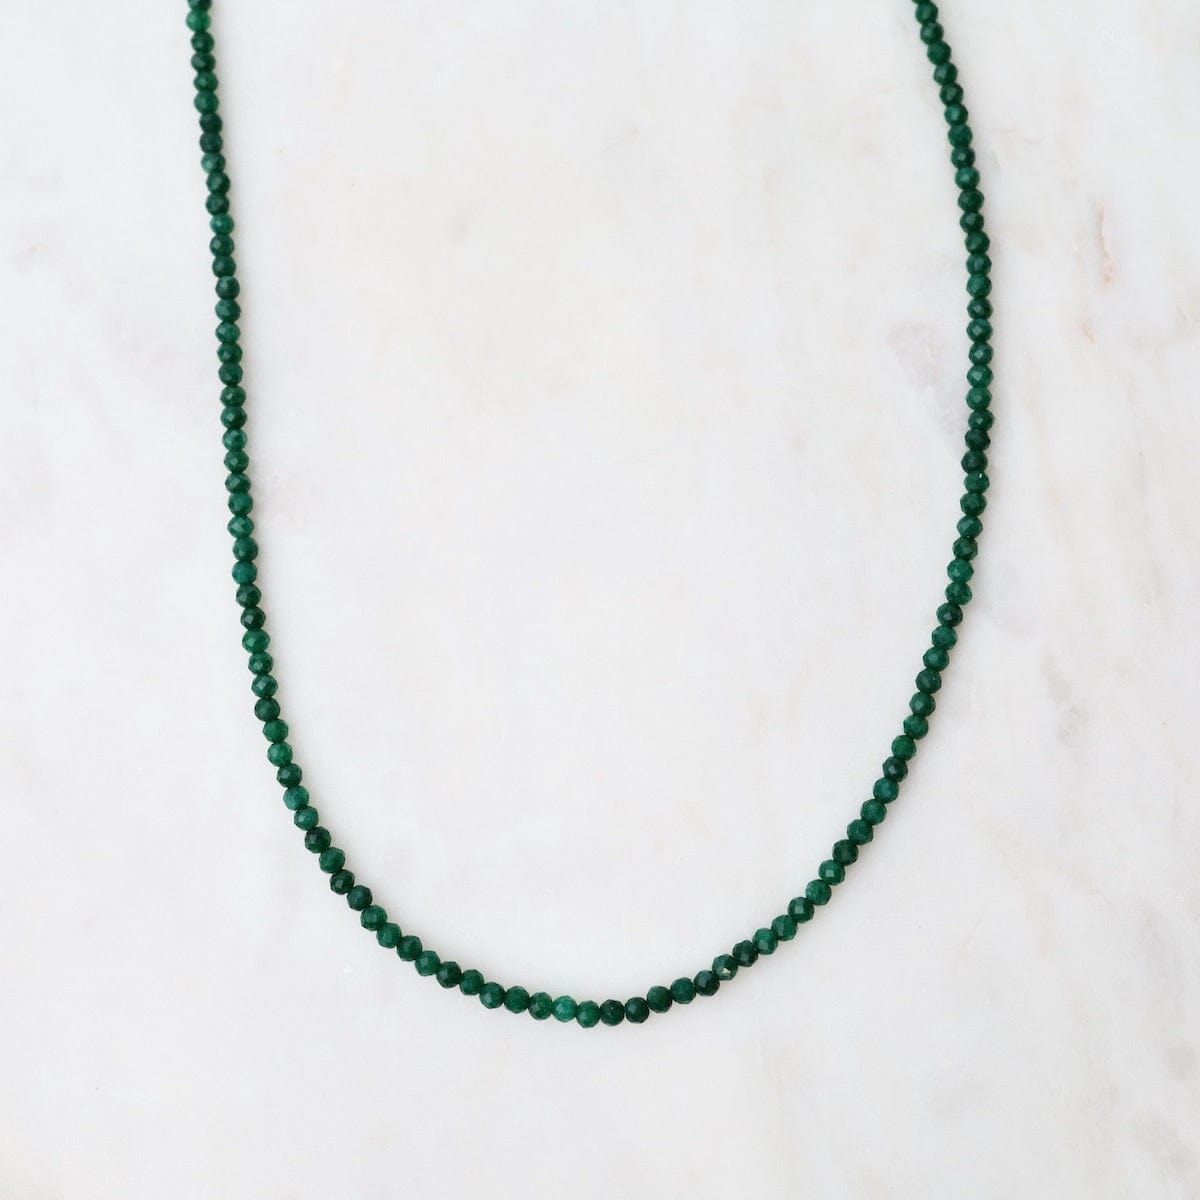 Courtly Dark Green Jade Beads Necklace